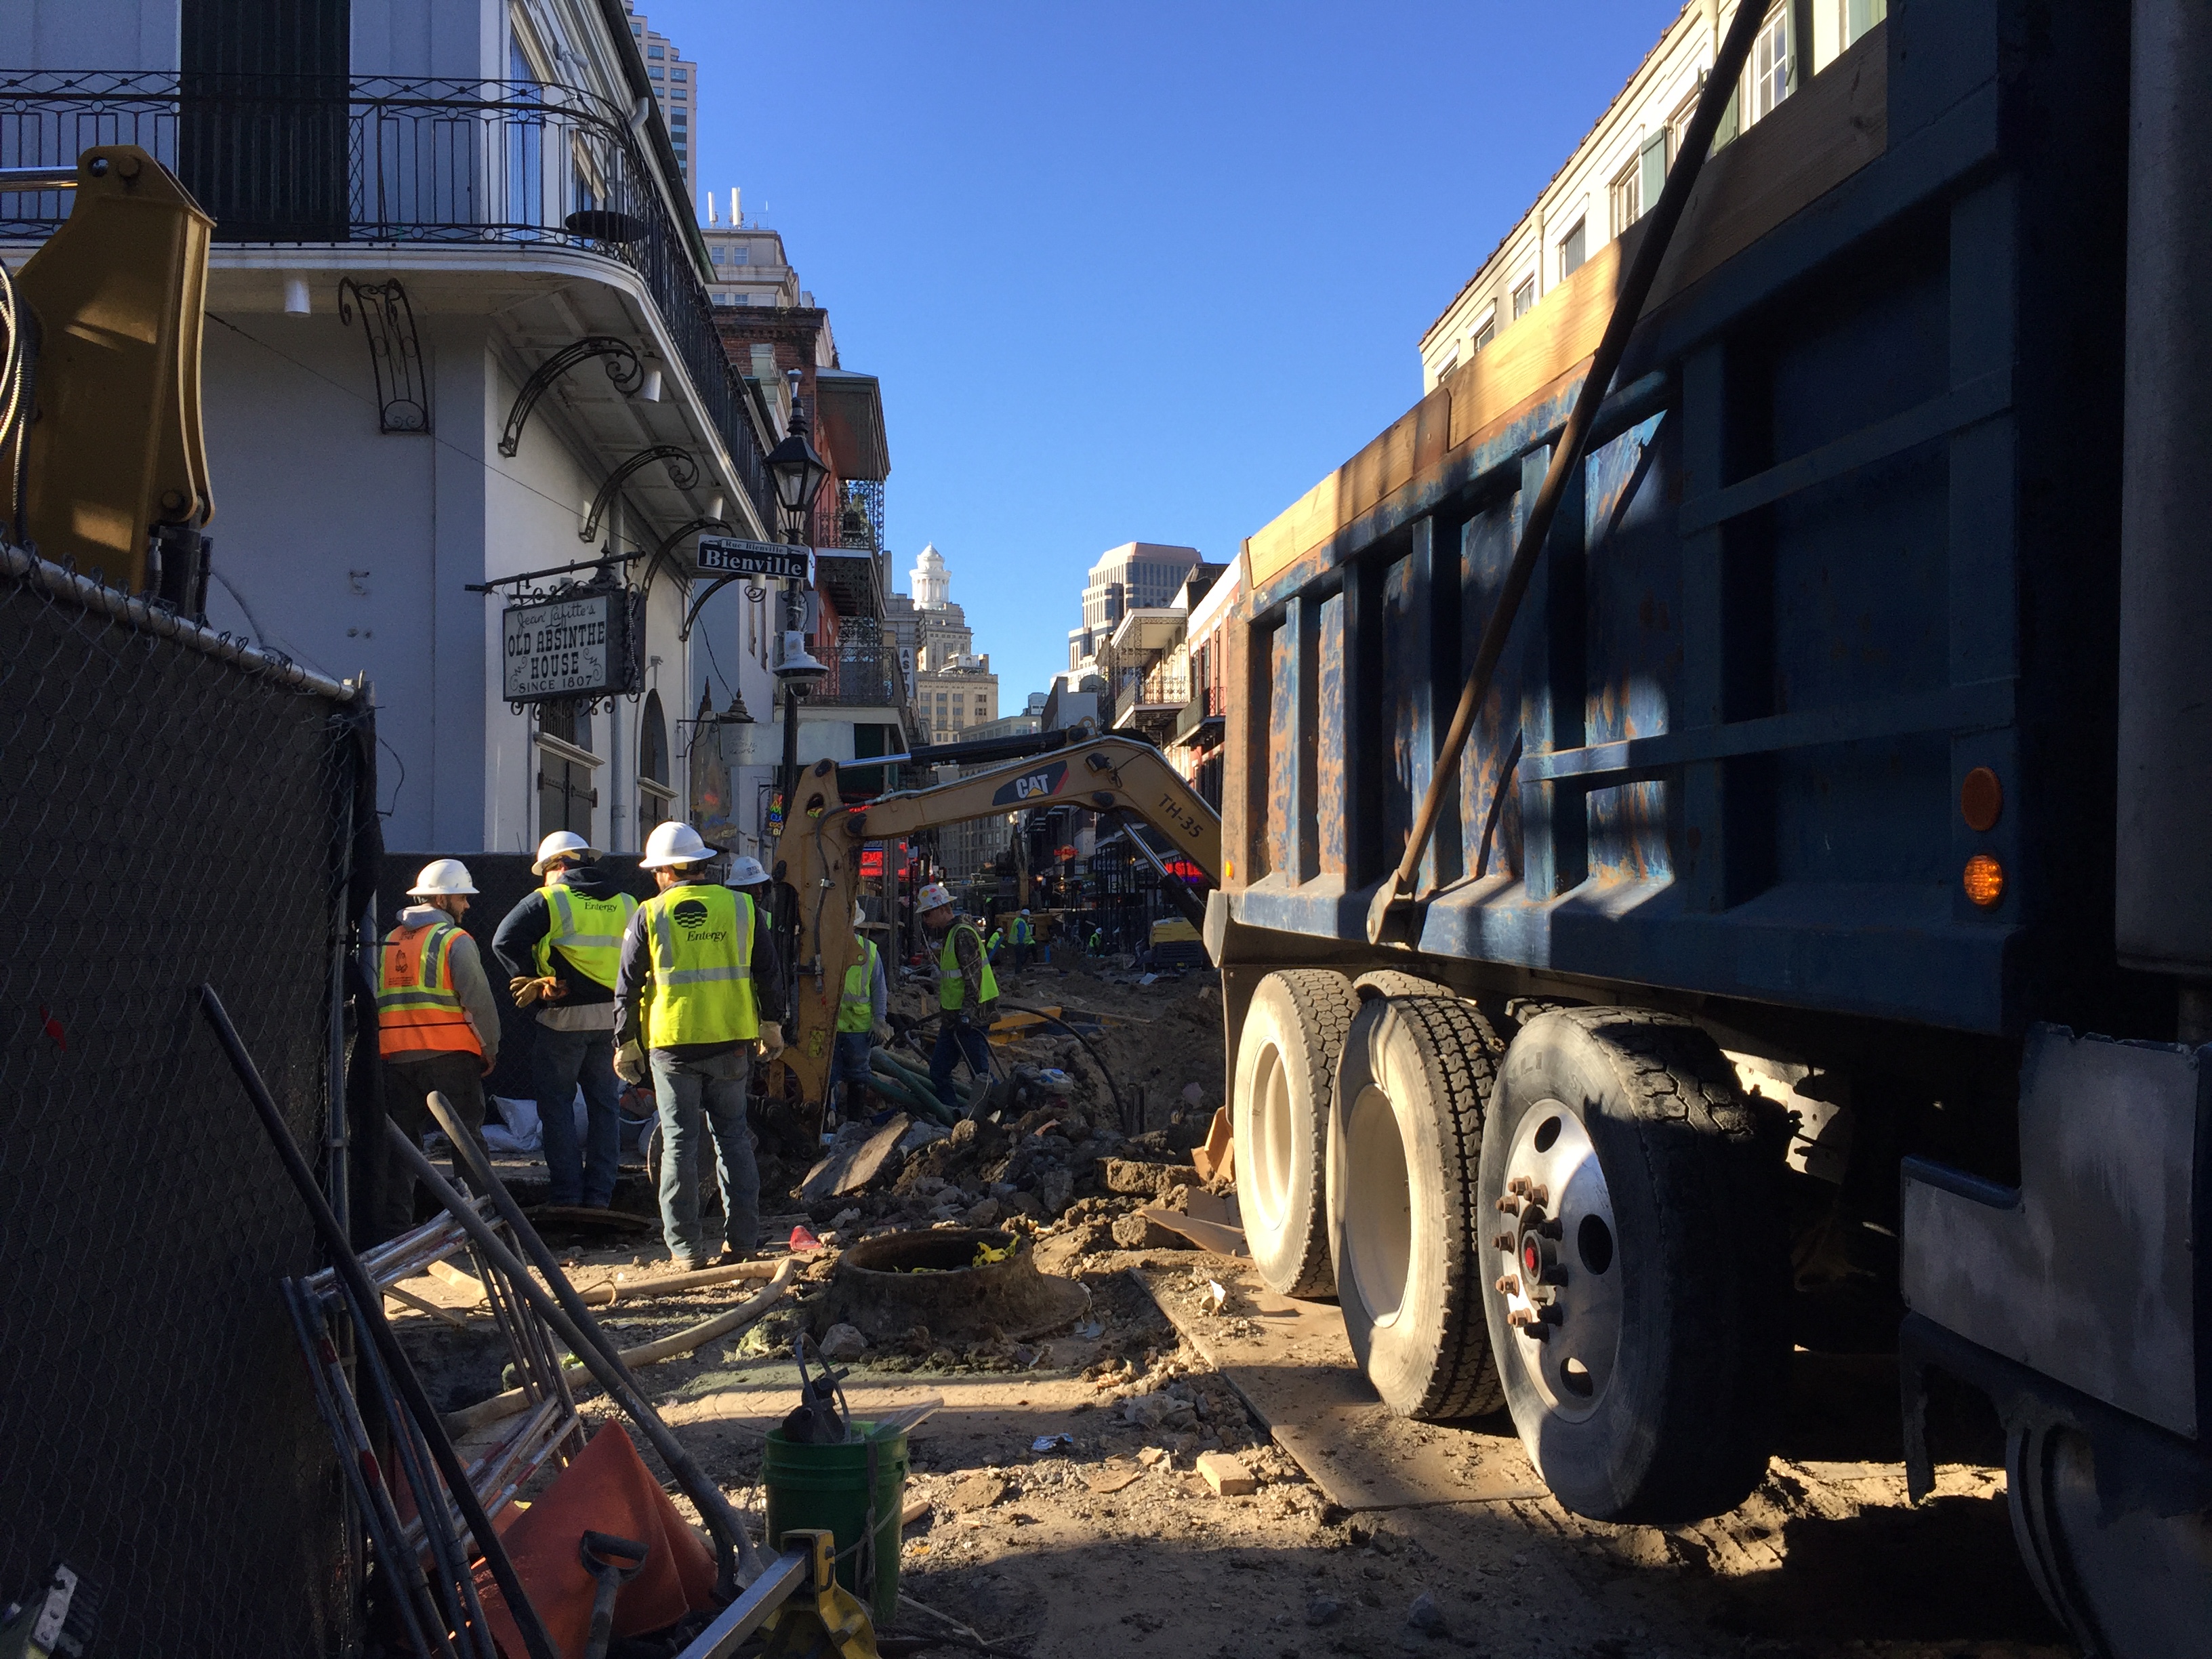 PHASE I OF FRENCH QUARTER INFRASTRUCTURE IMPROVEMENT PROJECT ON SCHEDULE TO BE COMPLETE IN DECEMBER